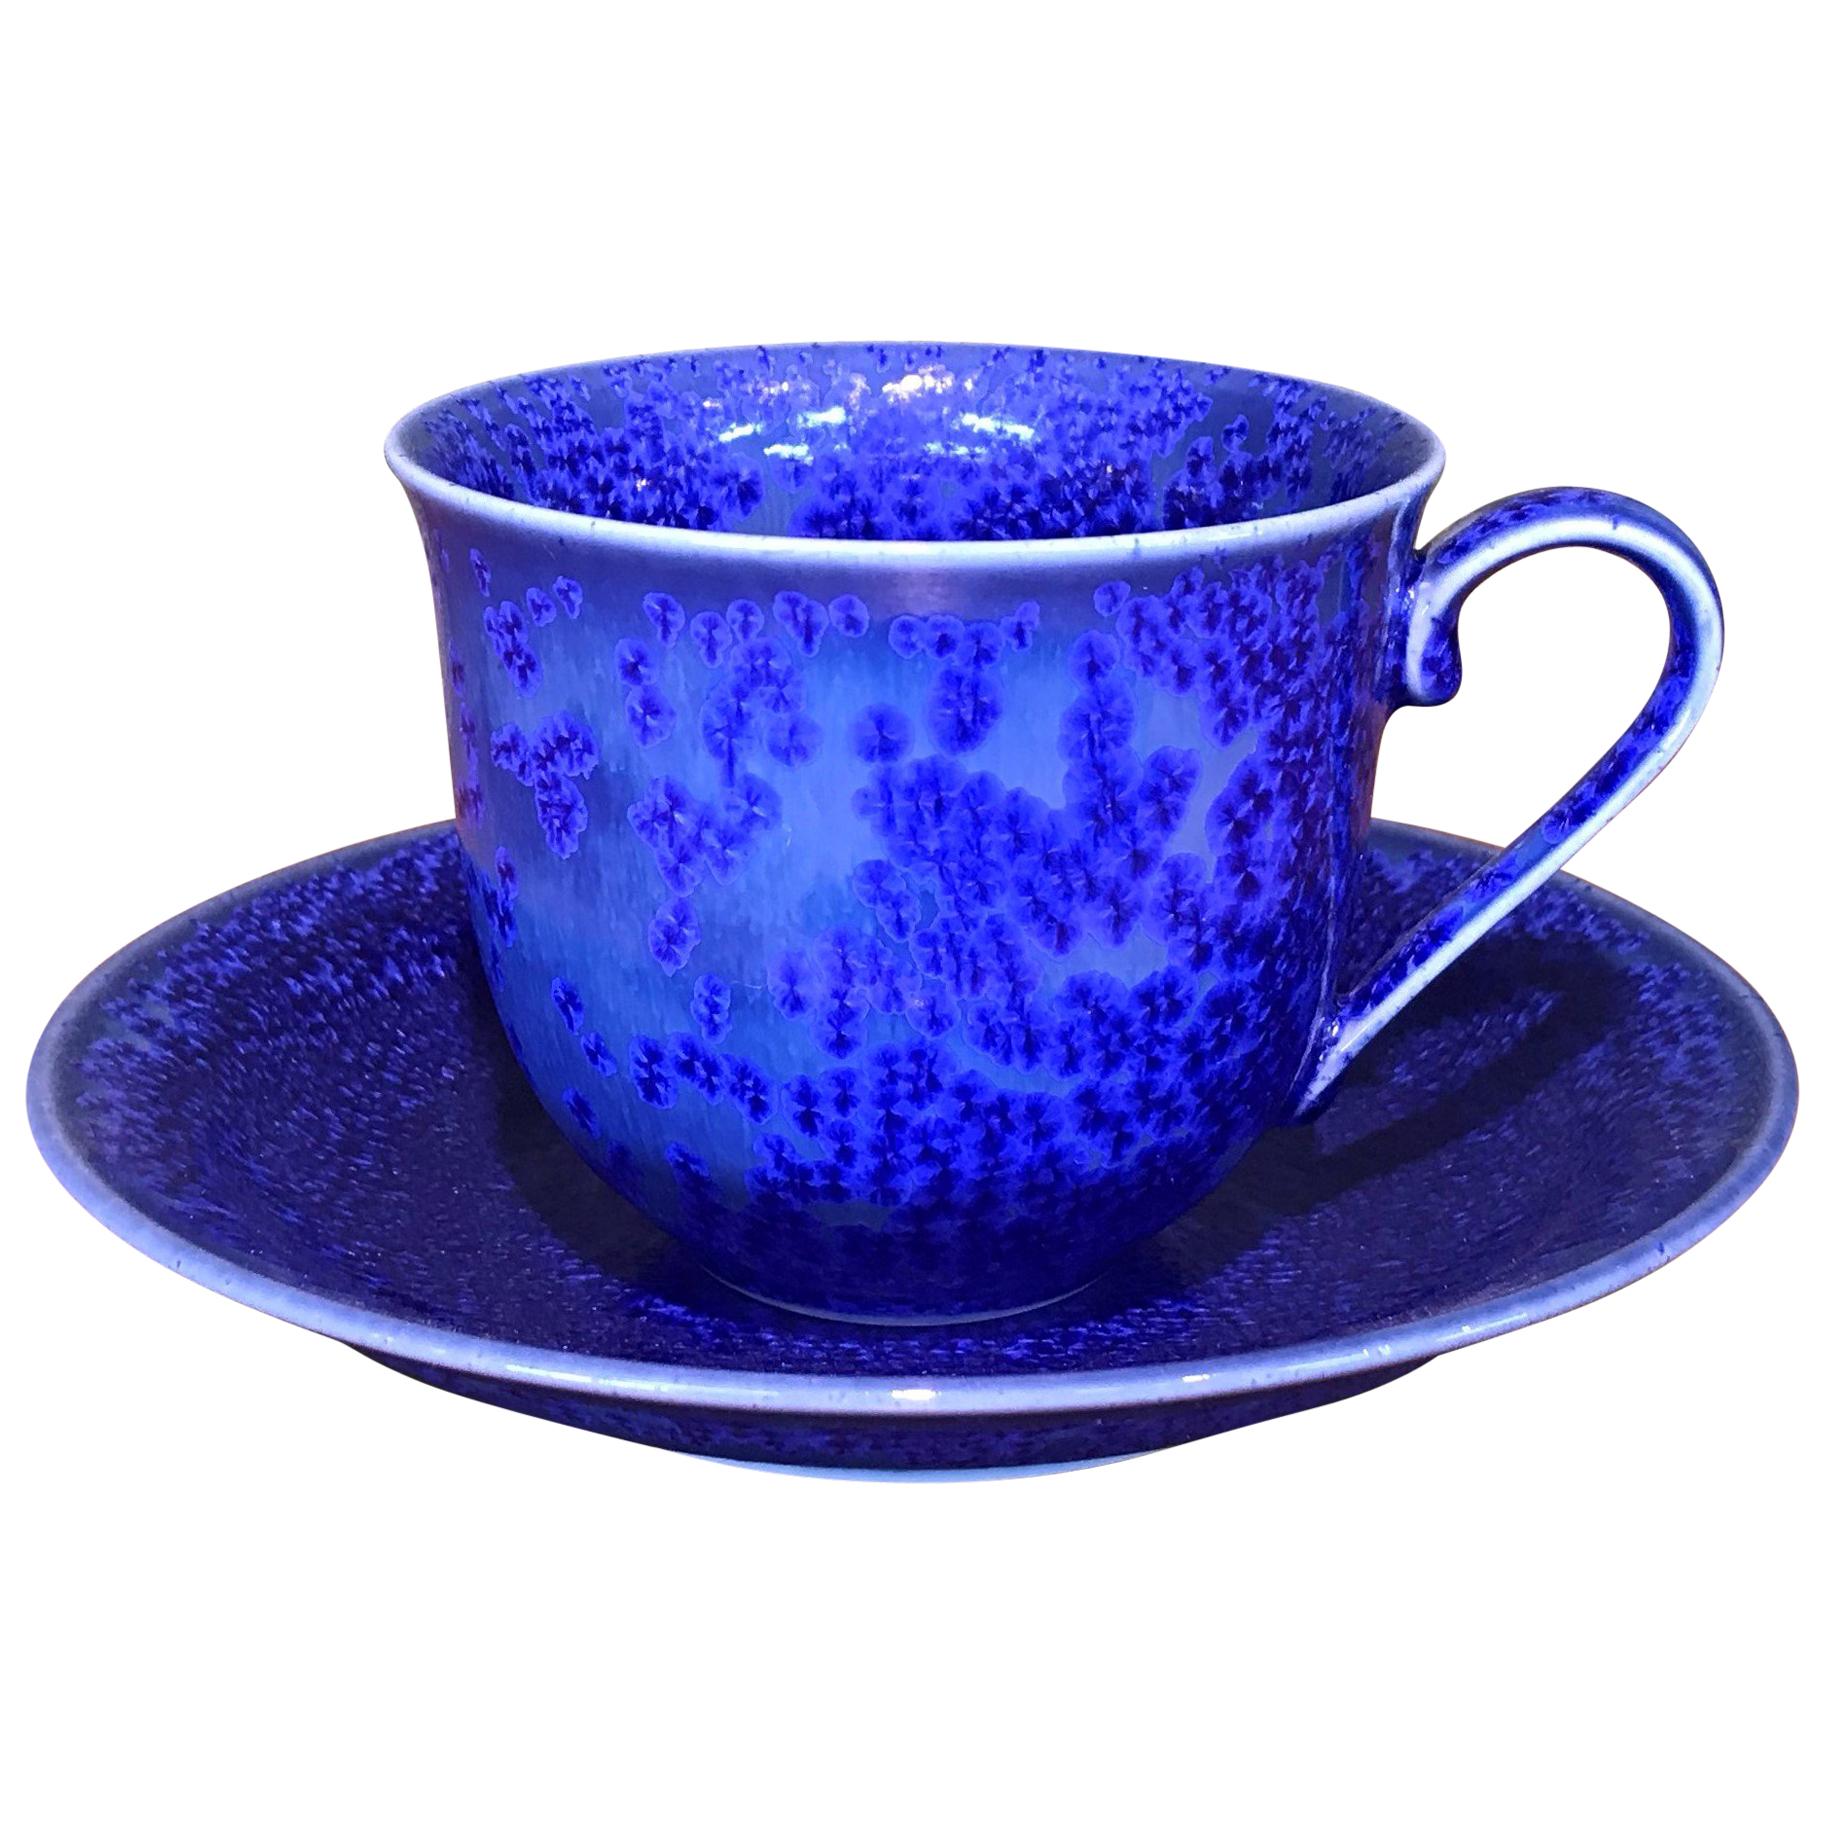 Japanese Contemporary Hand-Glazed Blue Porcelain Cup and Saucer by Master Artist